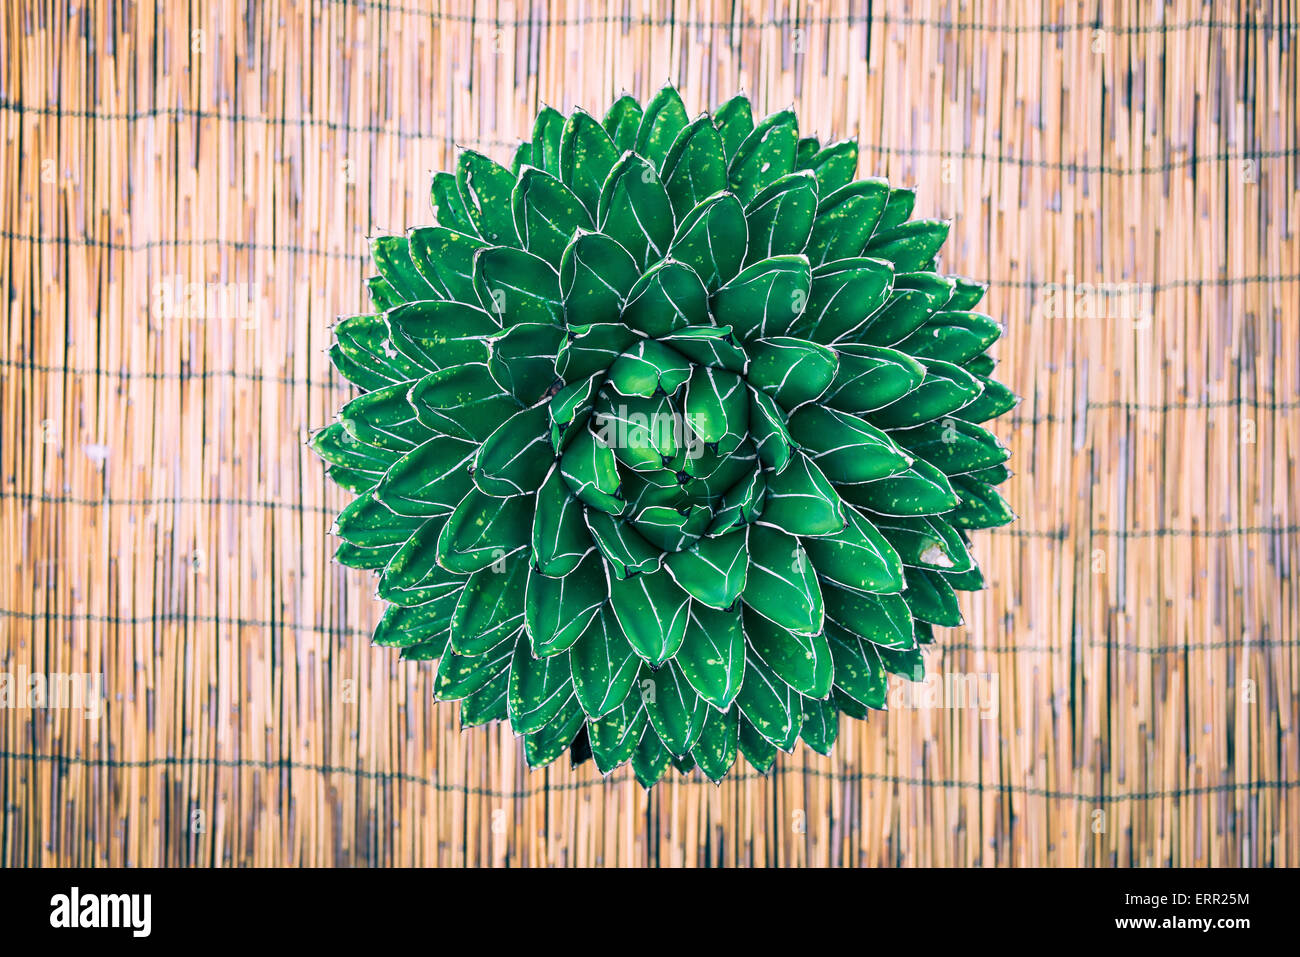 A fat plant from the top side revealing a beautiful texture effect Stock Photo